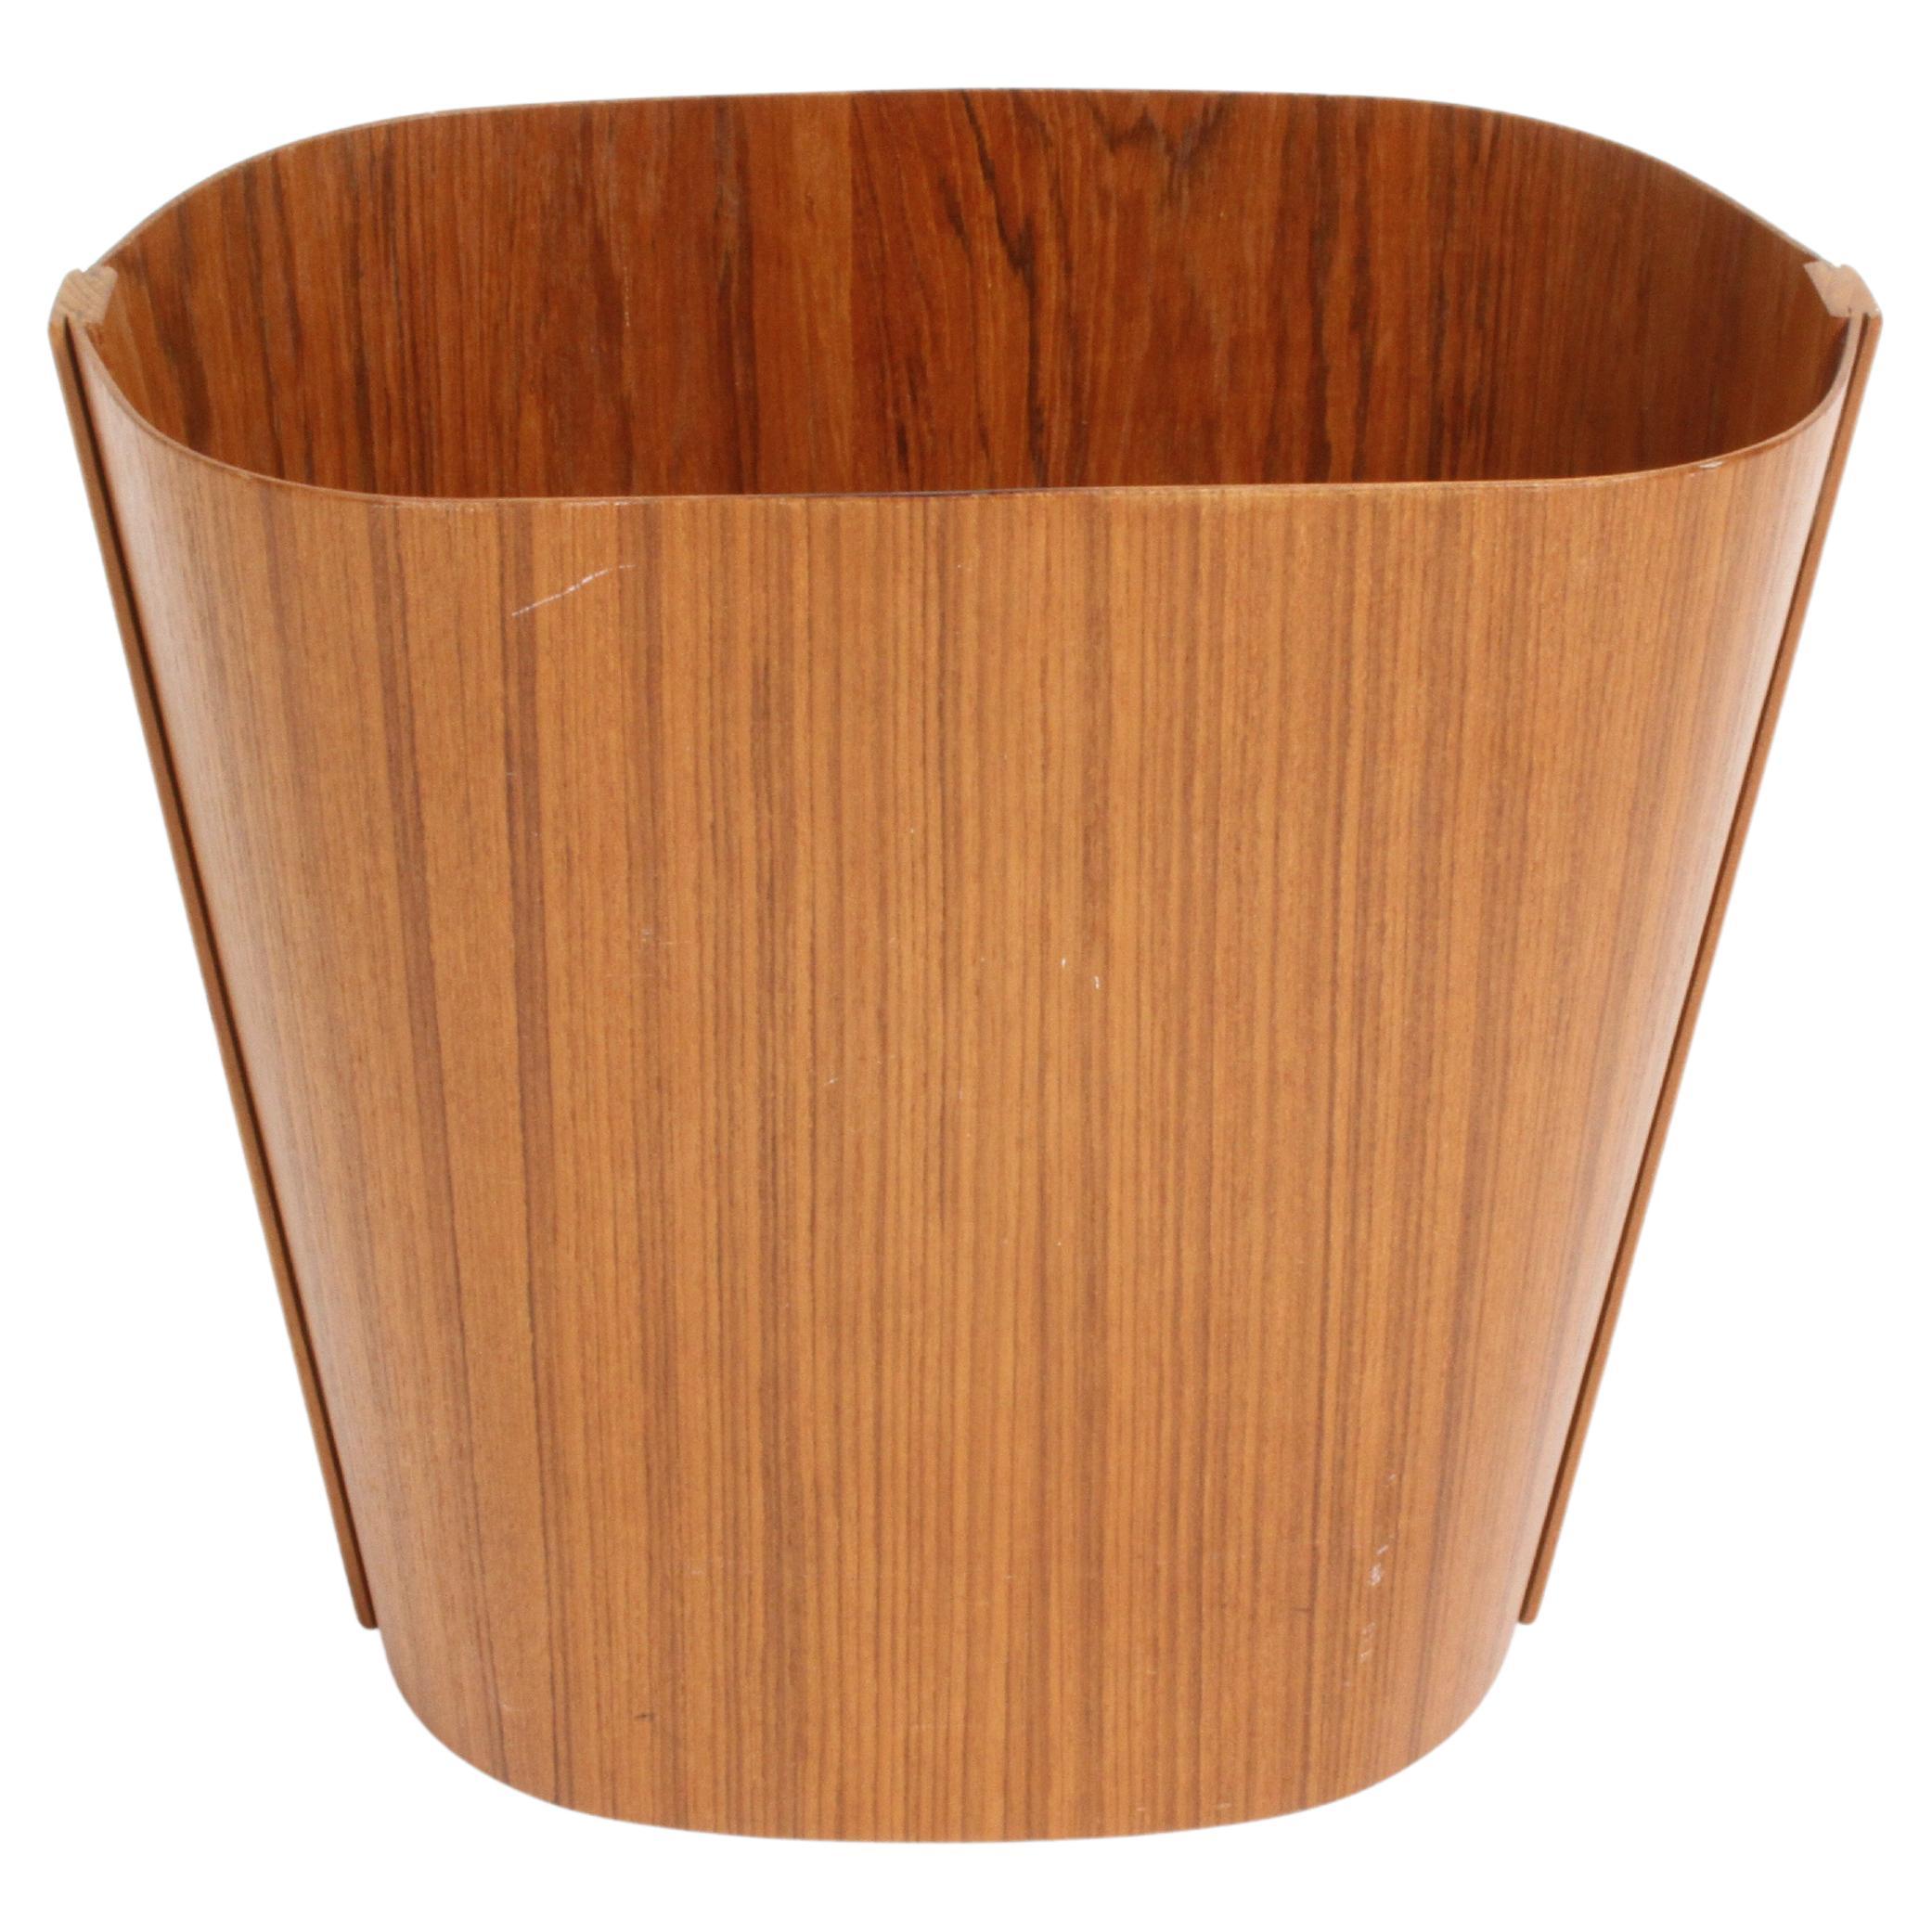 Danish modern teak bent plywood waste basket or trash can with and what looks like Rosewood interior designed Jan Nielsen for Beni Mobler Denmark. In very nice condition, few marks. Label.